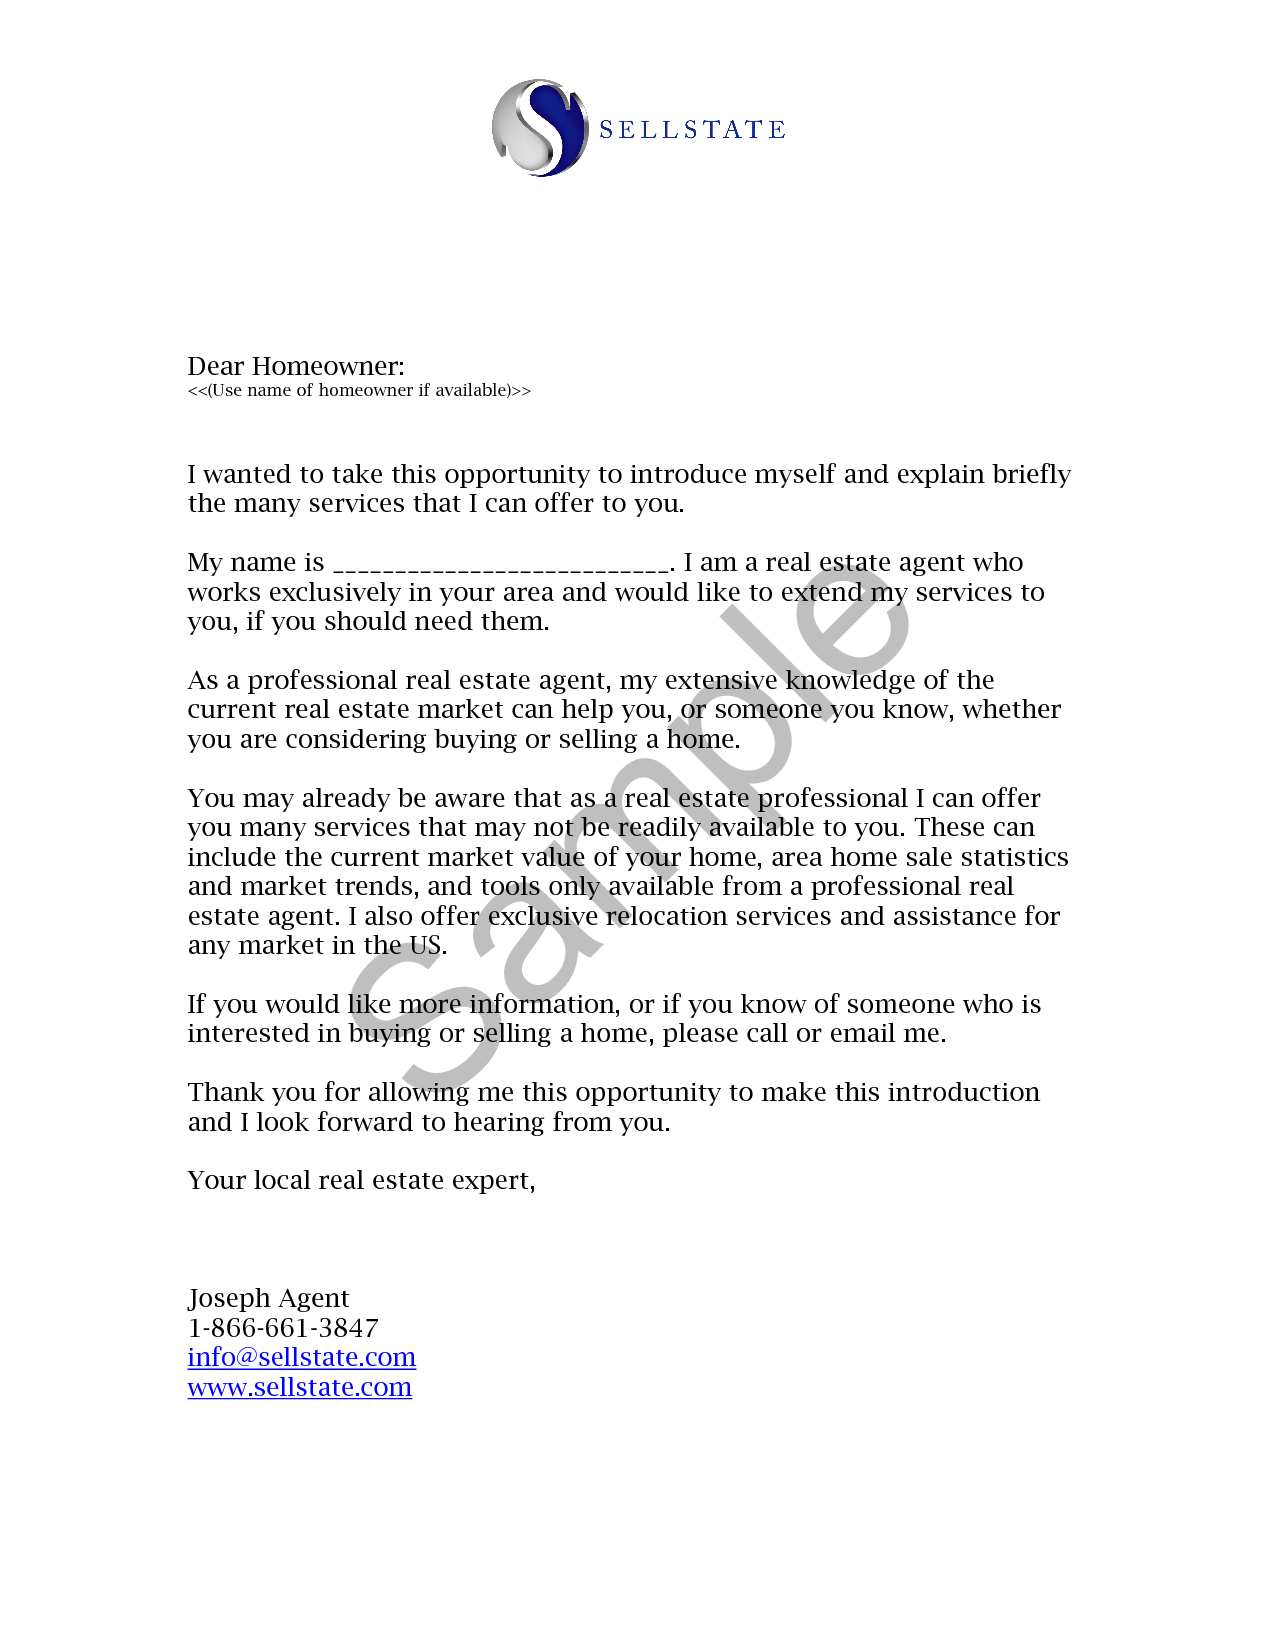 Real Estate Letters of Introduction Introduction Letter Real 